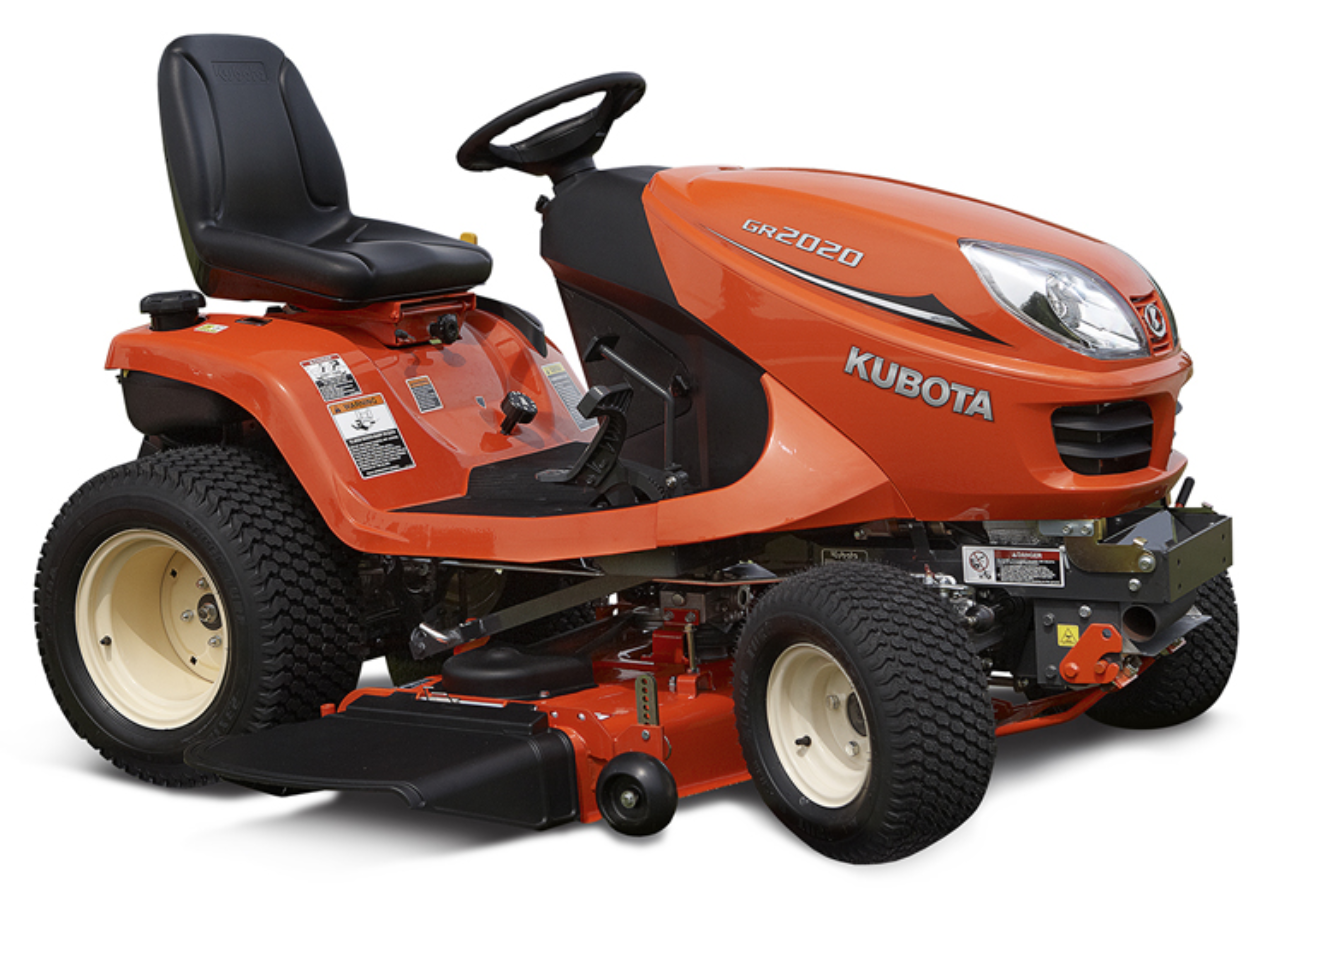 Kubota GR 2020 Lawn and Garden Tractor